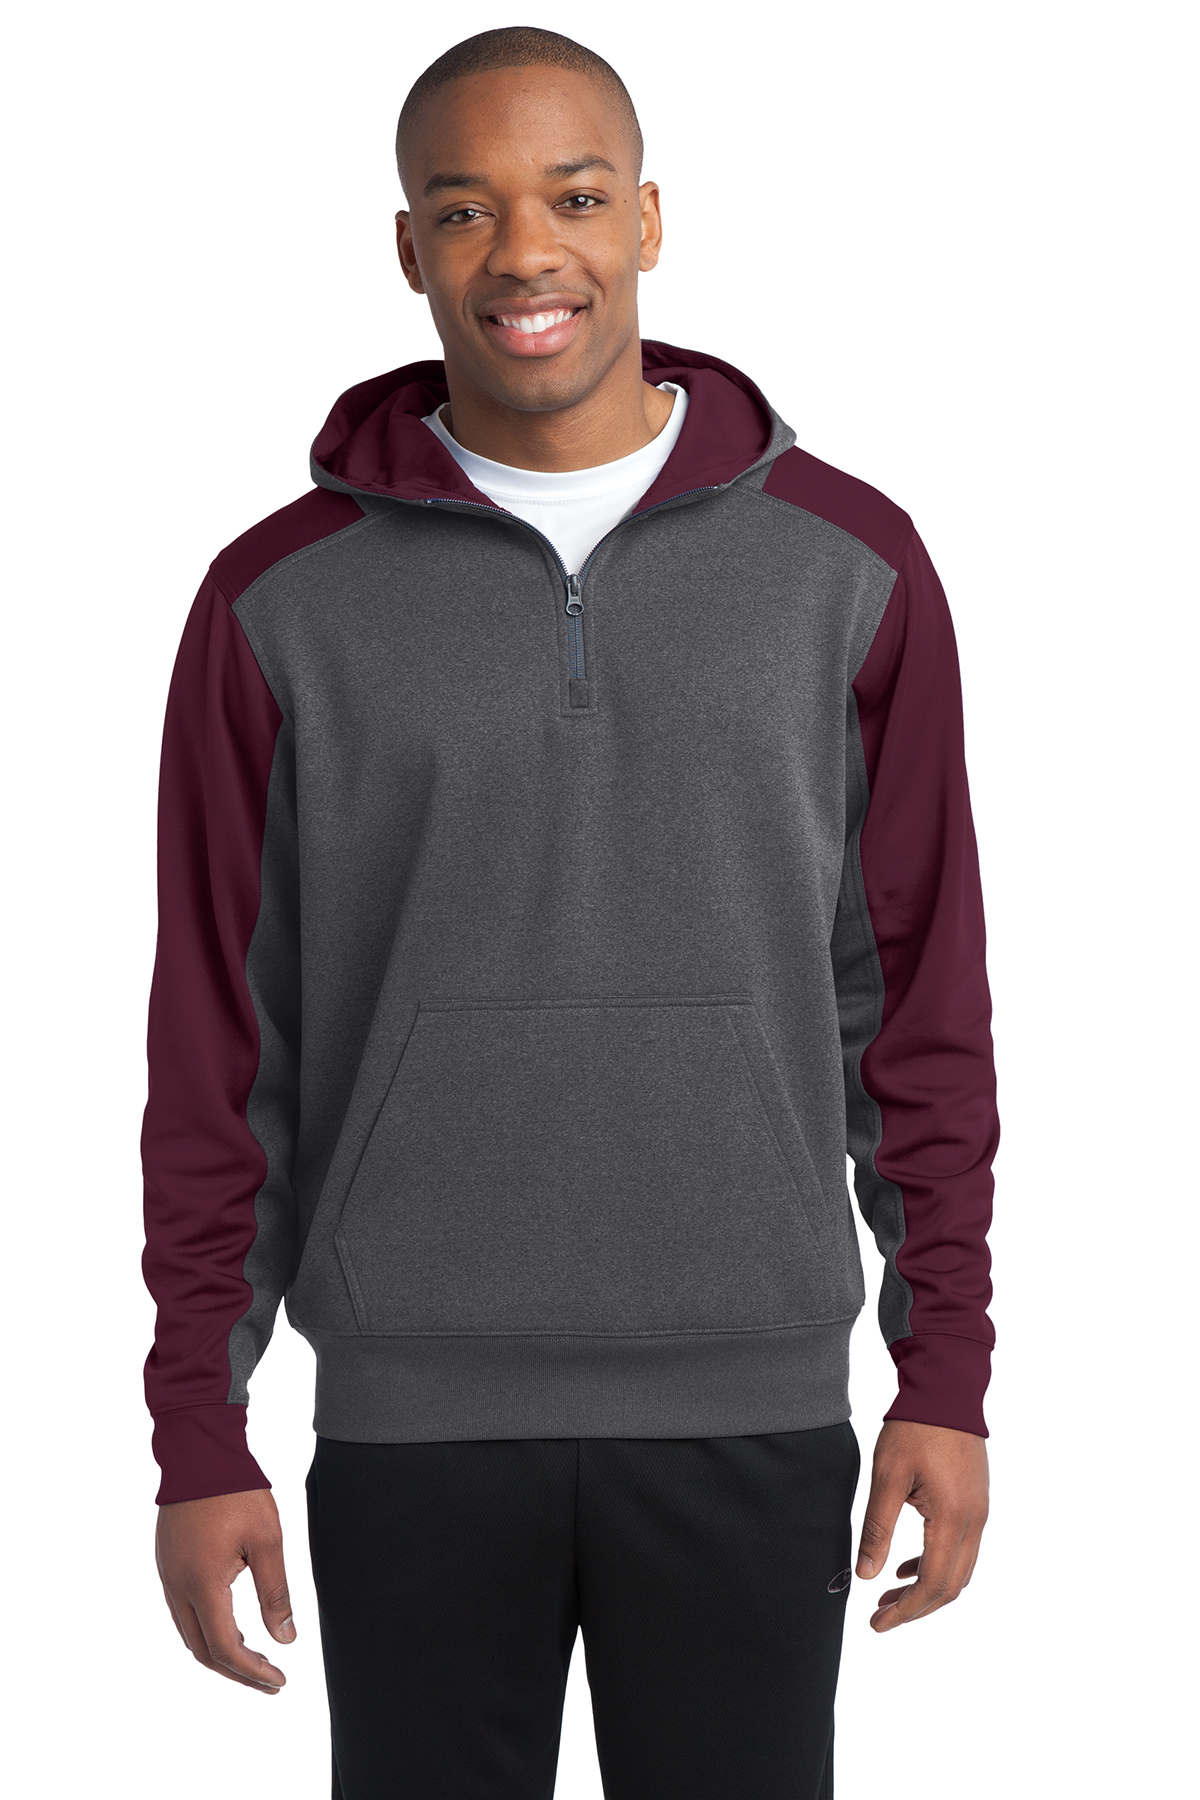 click to view Graphite Heather/Maroon